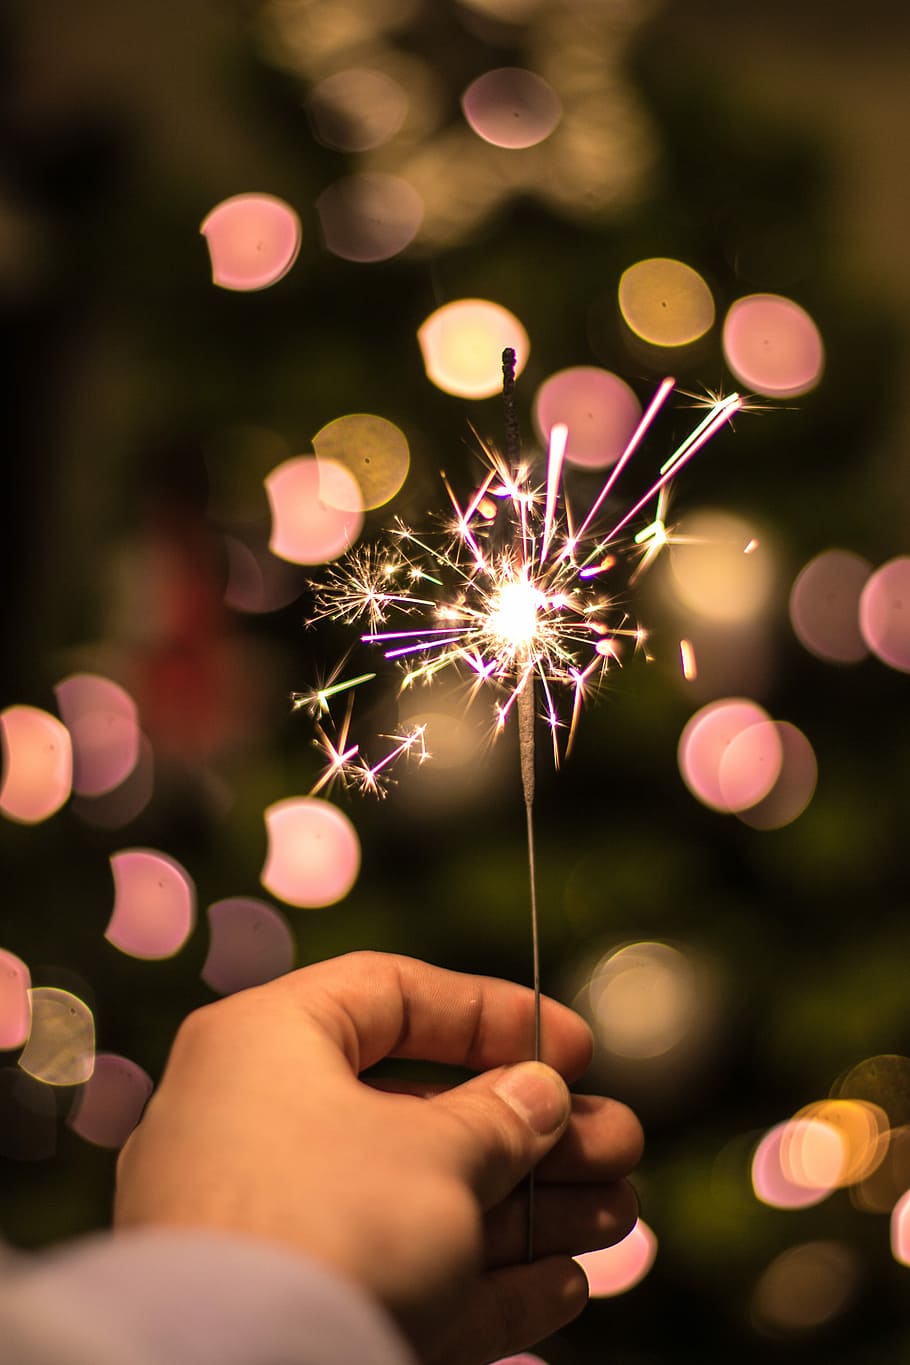 Hd Wallpaper Bokeh Photography Of Person Holding Fireworks Person Holding Fire Cracker Wallpaper Flare